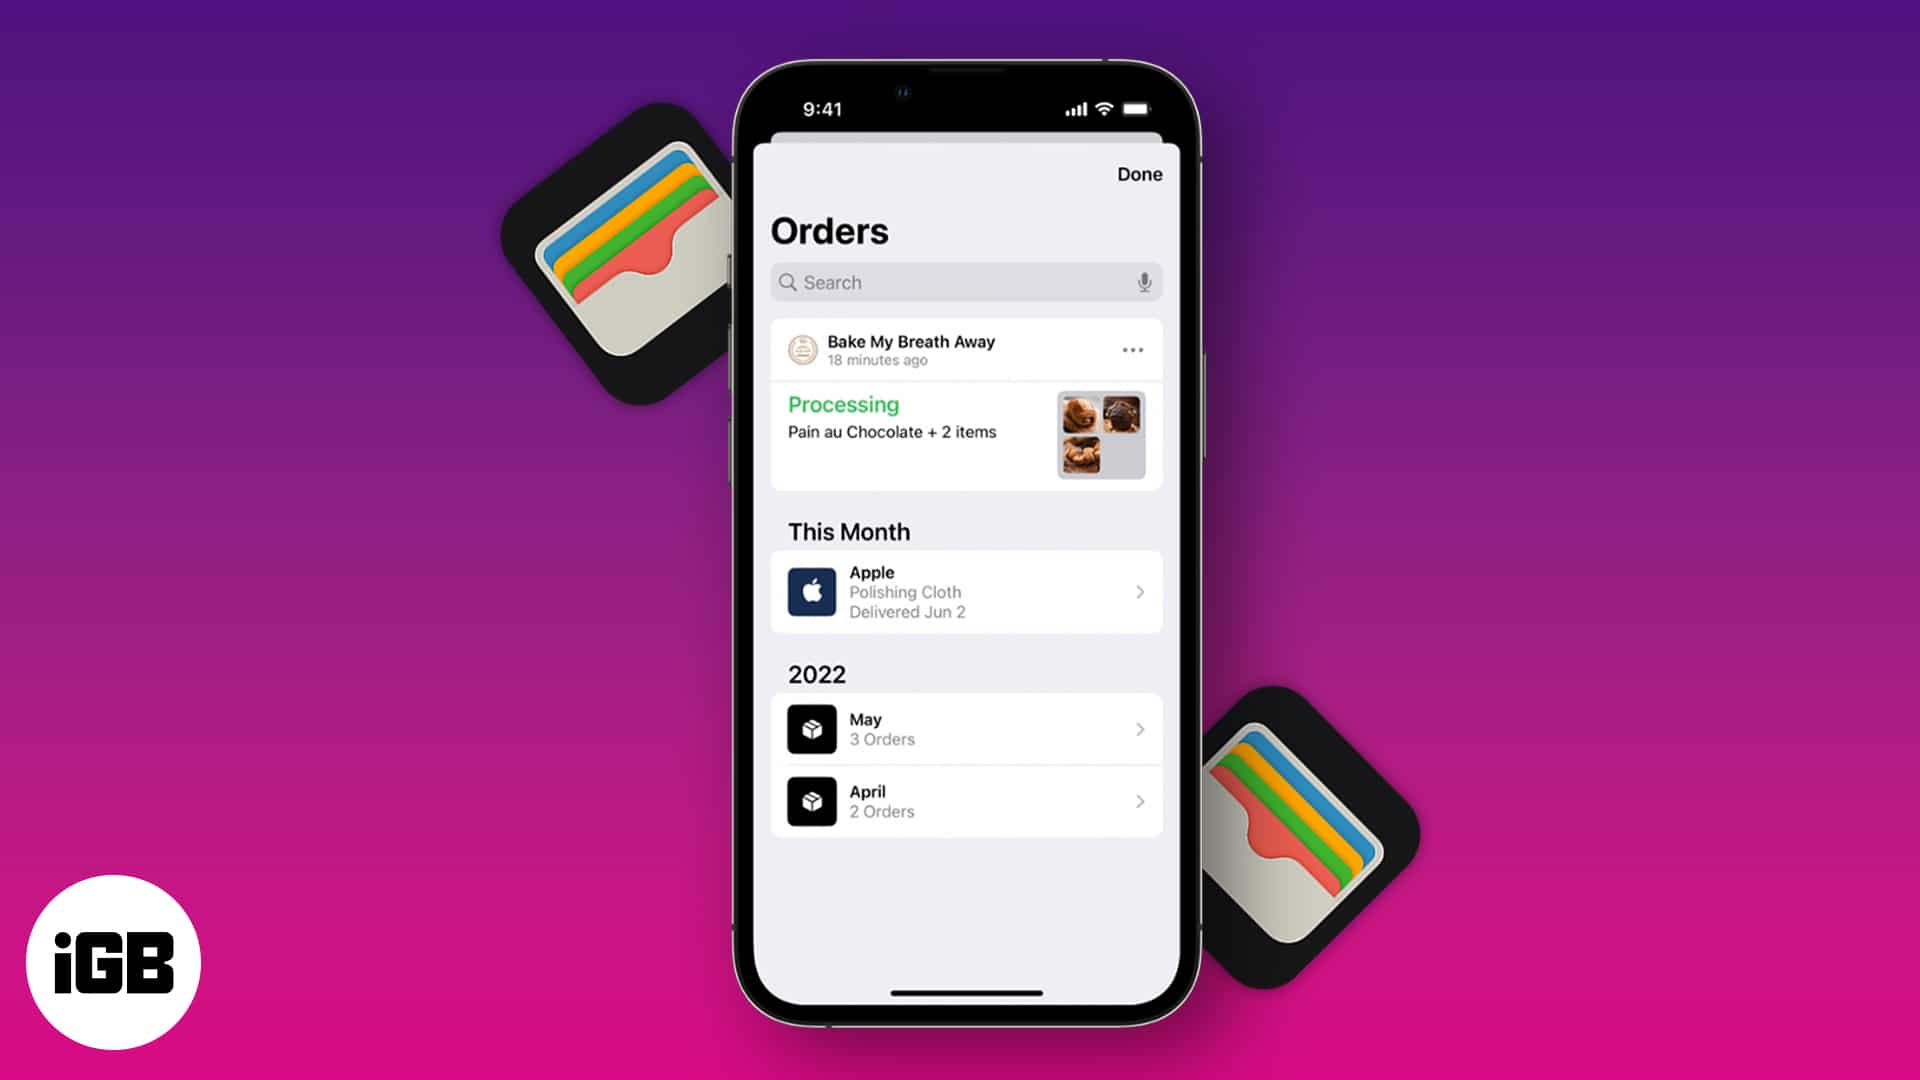 How to track your orders in Wallet app on iPhone